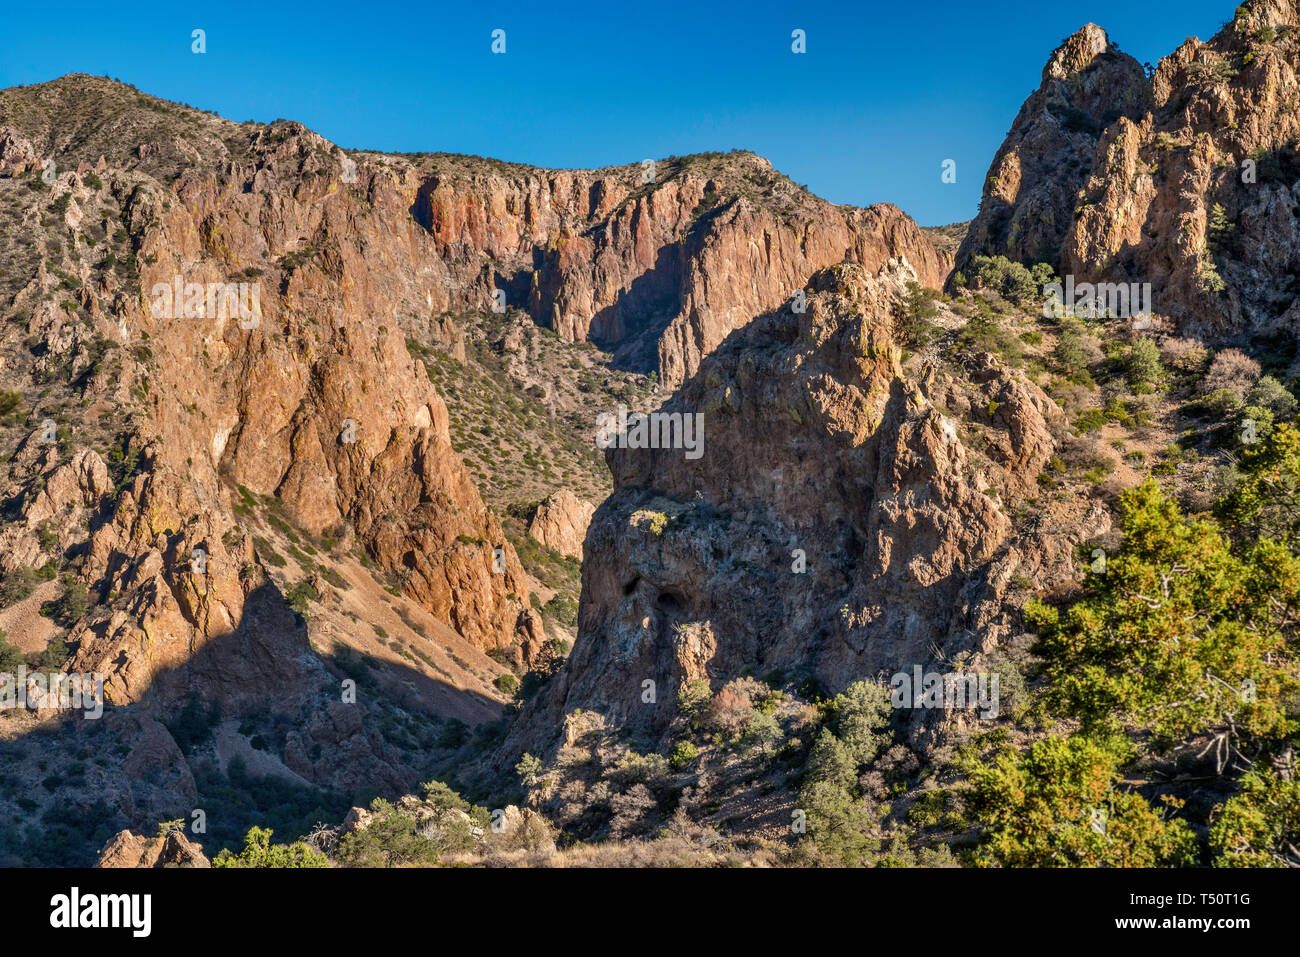 Green Gulch, view from Lost Mine Trail near Panther Pass in Chisos Mountains, Big Bend National Park, Texas, USA Stock Photo